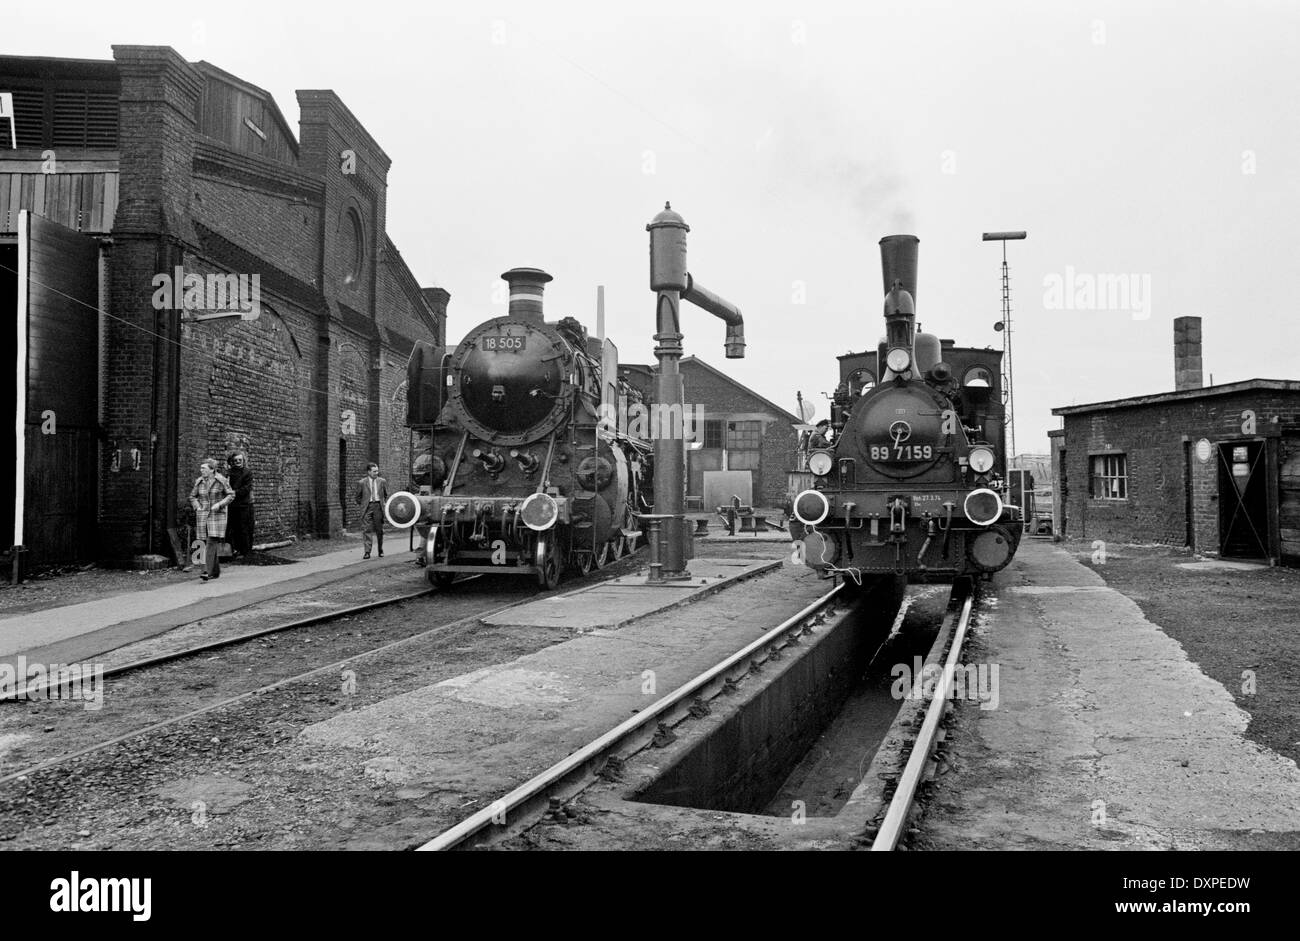 Stolberg, Germany, the steam locomotive 18 505 and 89 7159 in the depot Stock Photo